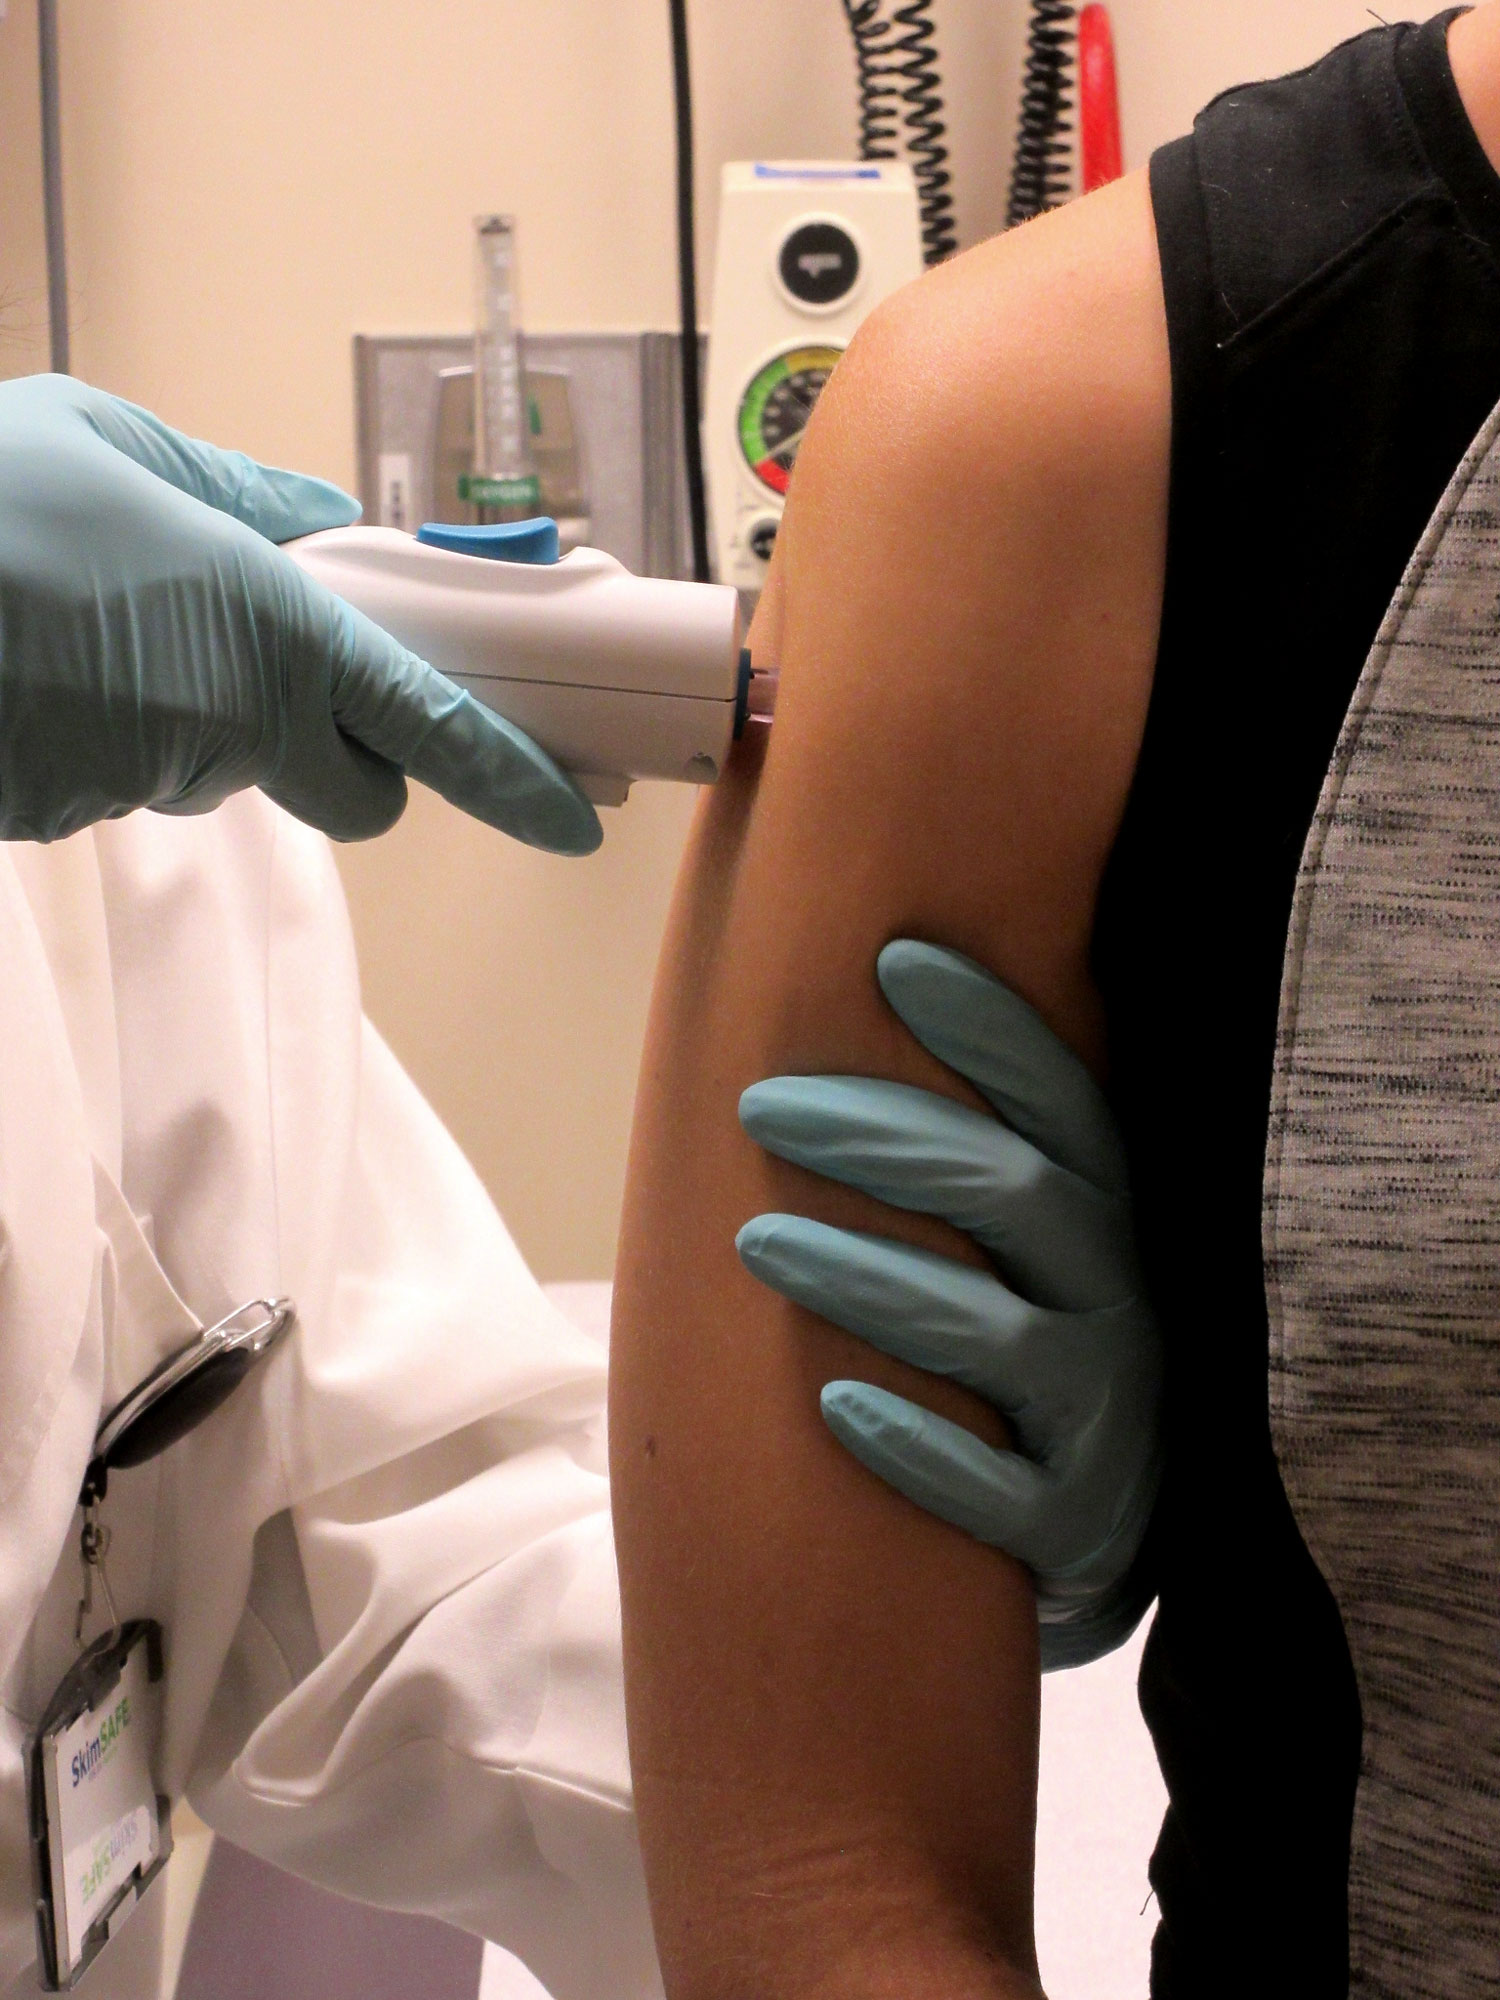 A healthy patient receives an investigational DNA vaccine developed by government researchers via a needle-free injection.